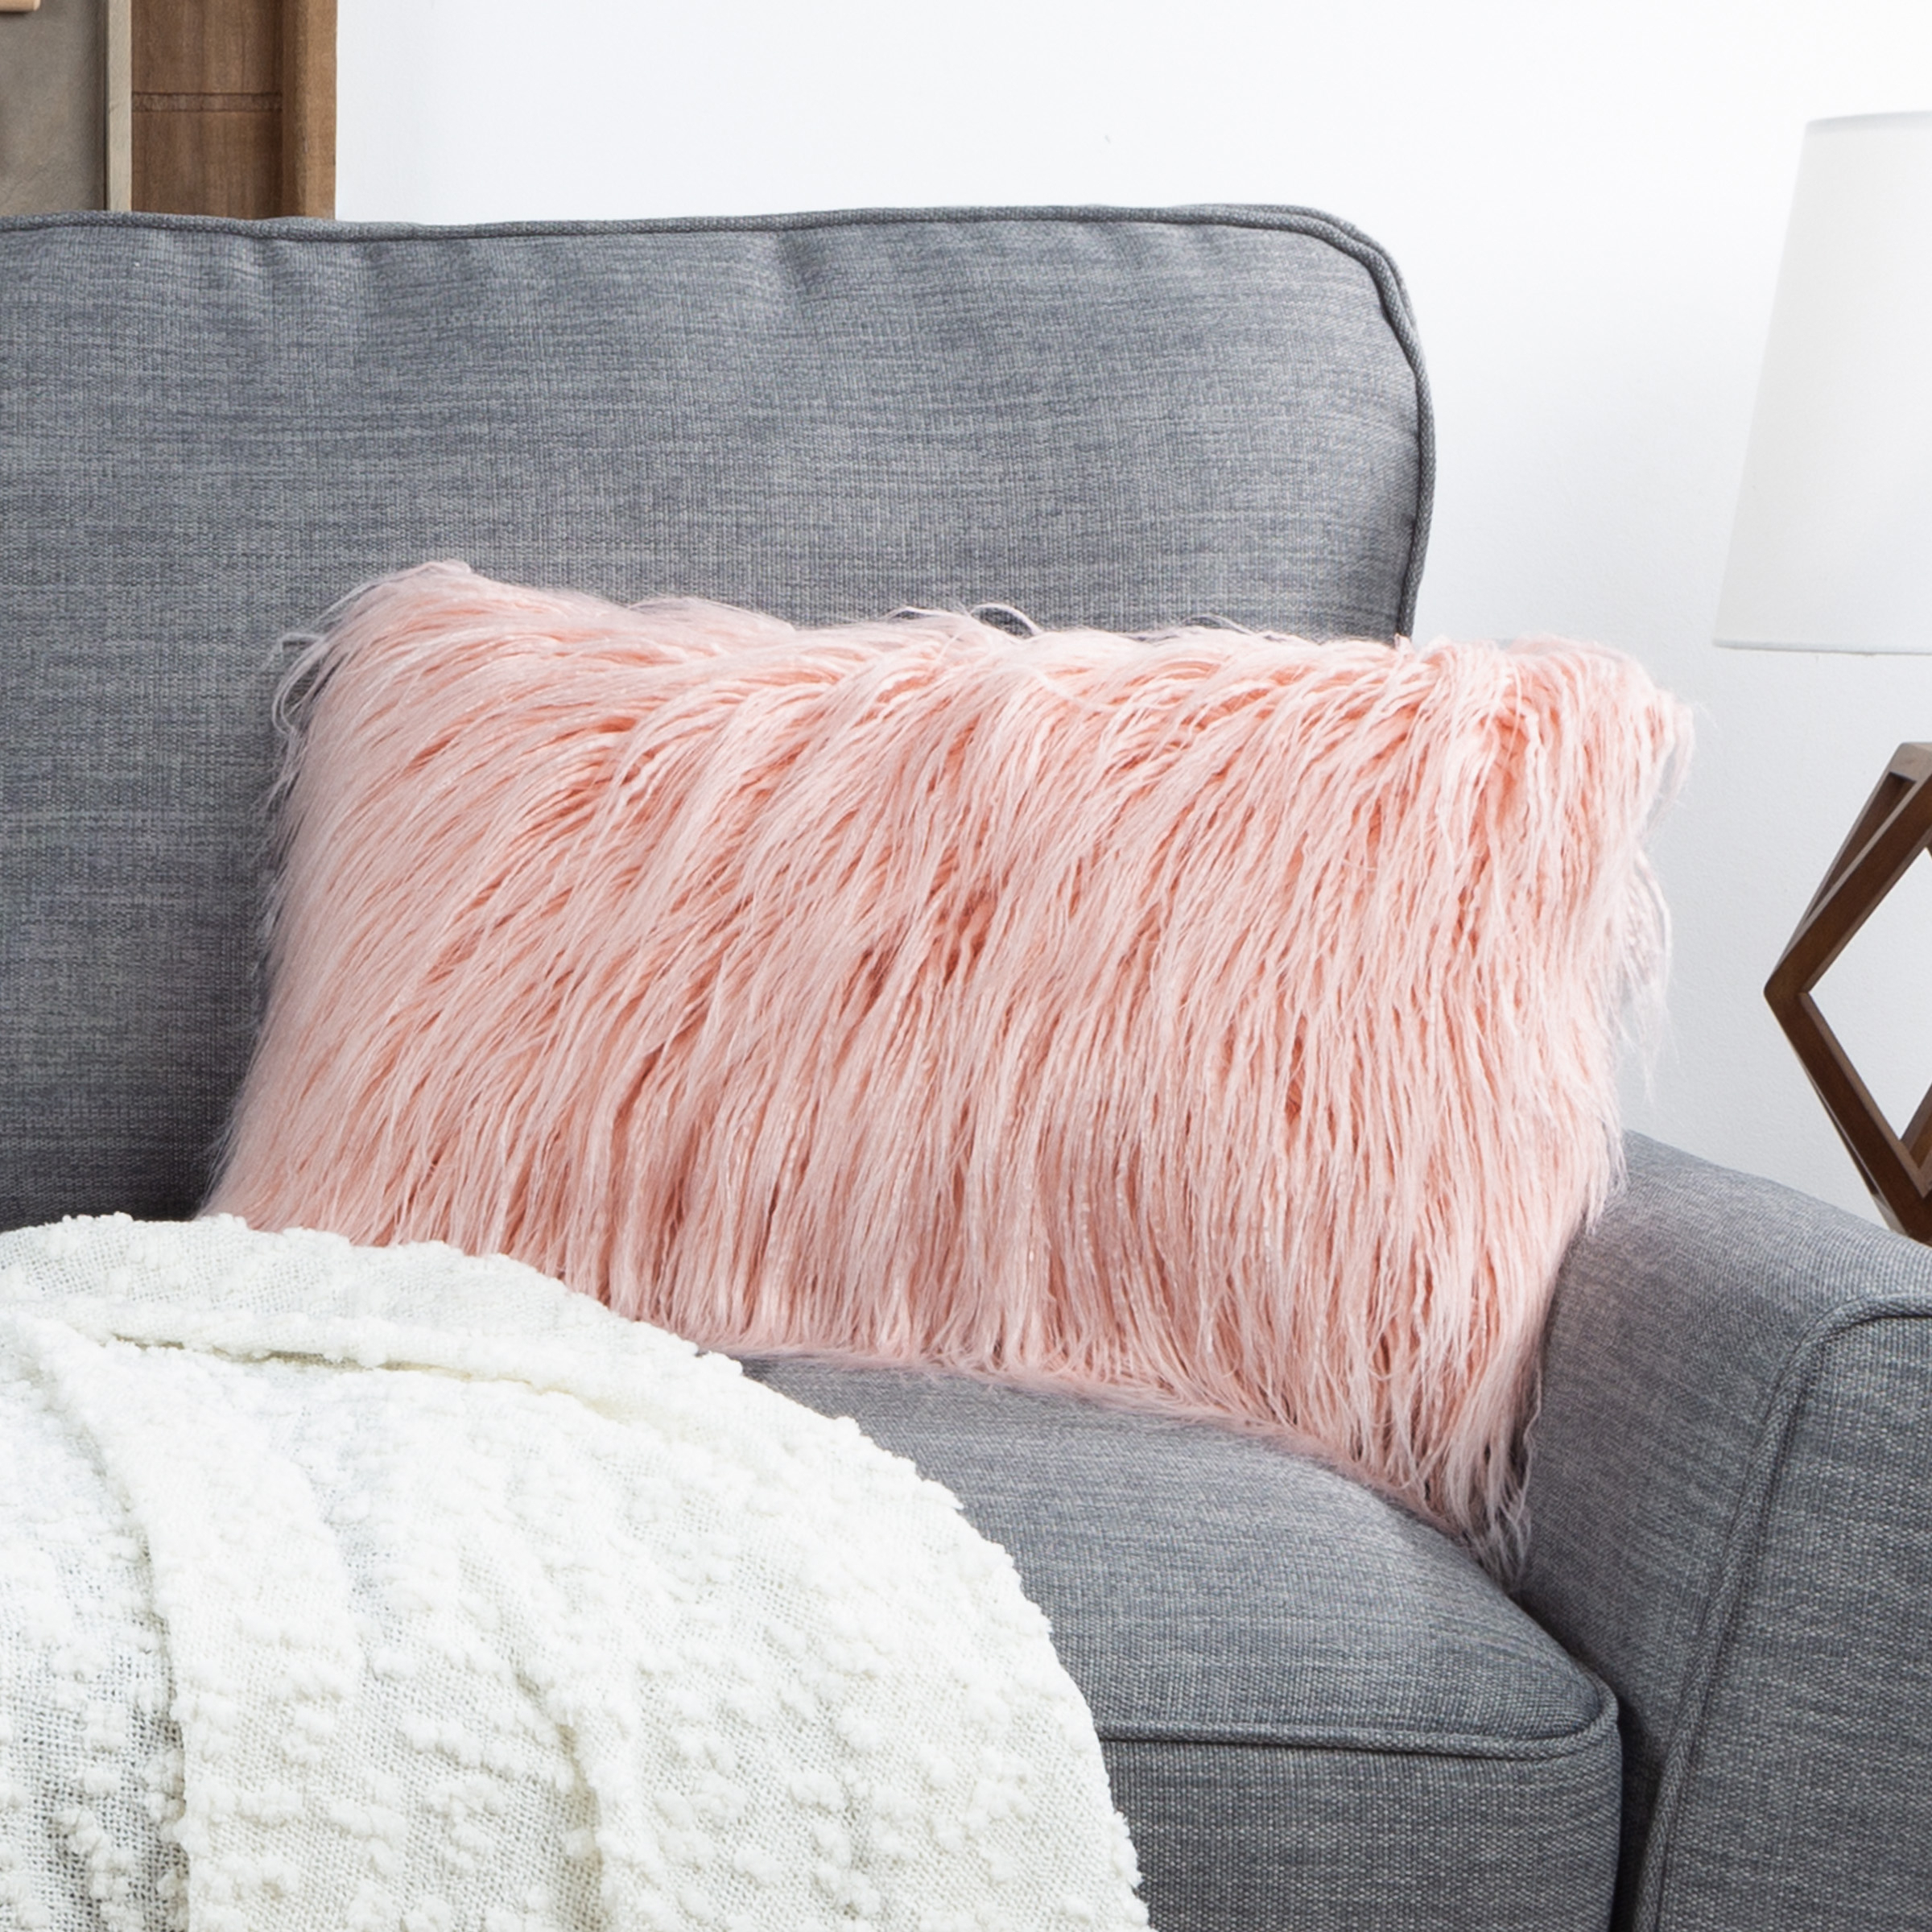 20 X 12 Inch Mongolian Faux Fur Throw Accent Pillow 6 Inches Thick Shag Style - Pink